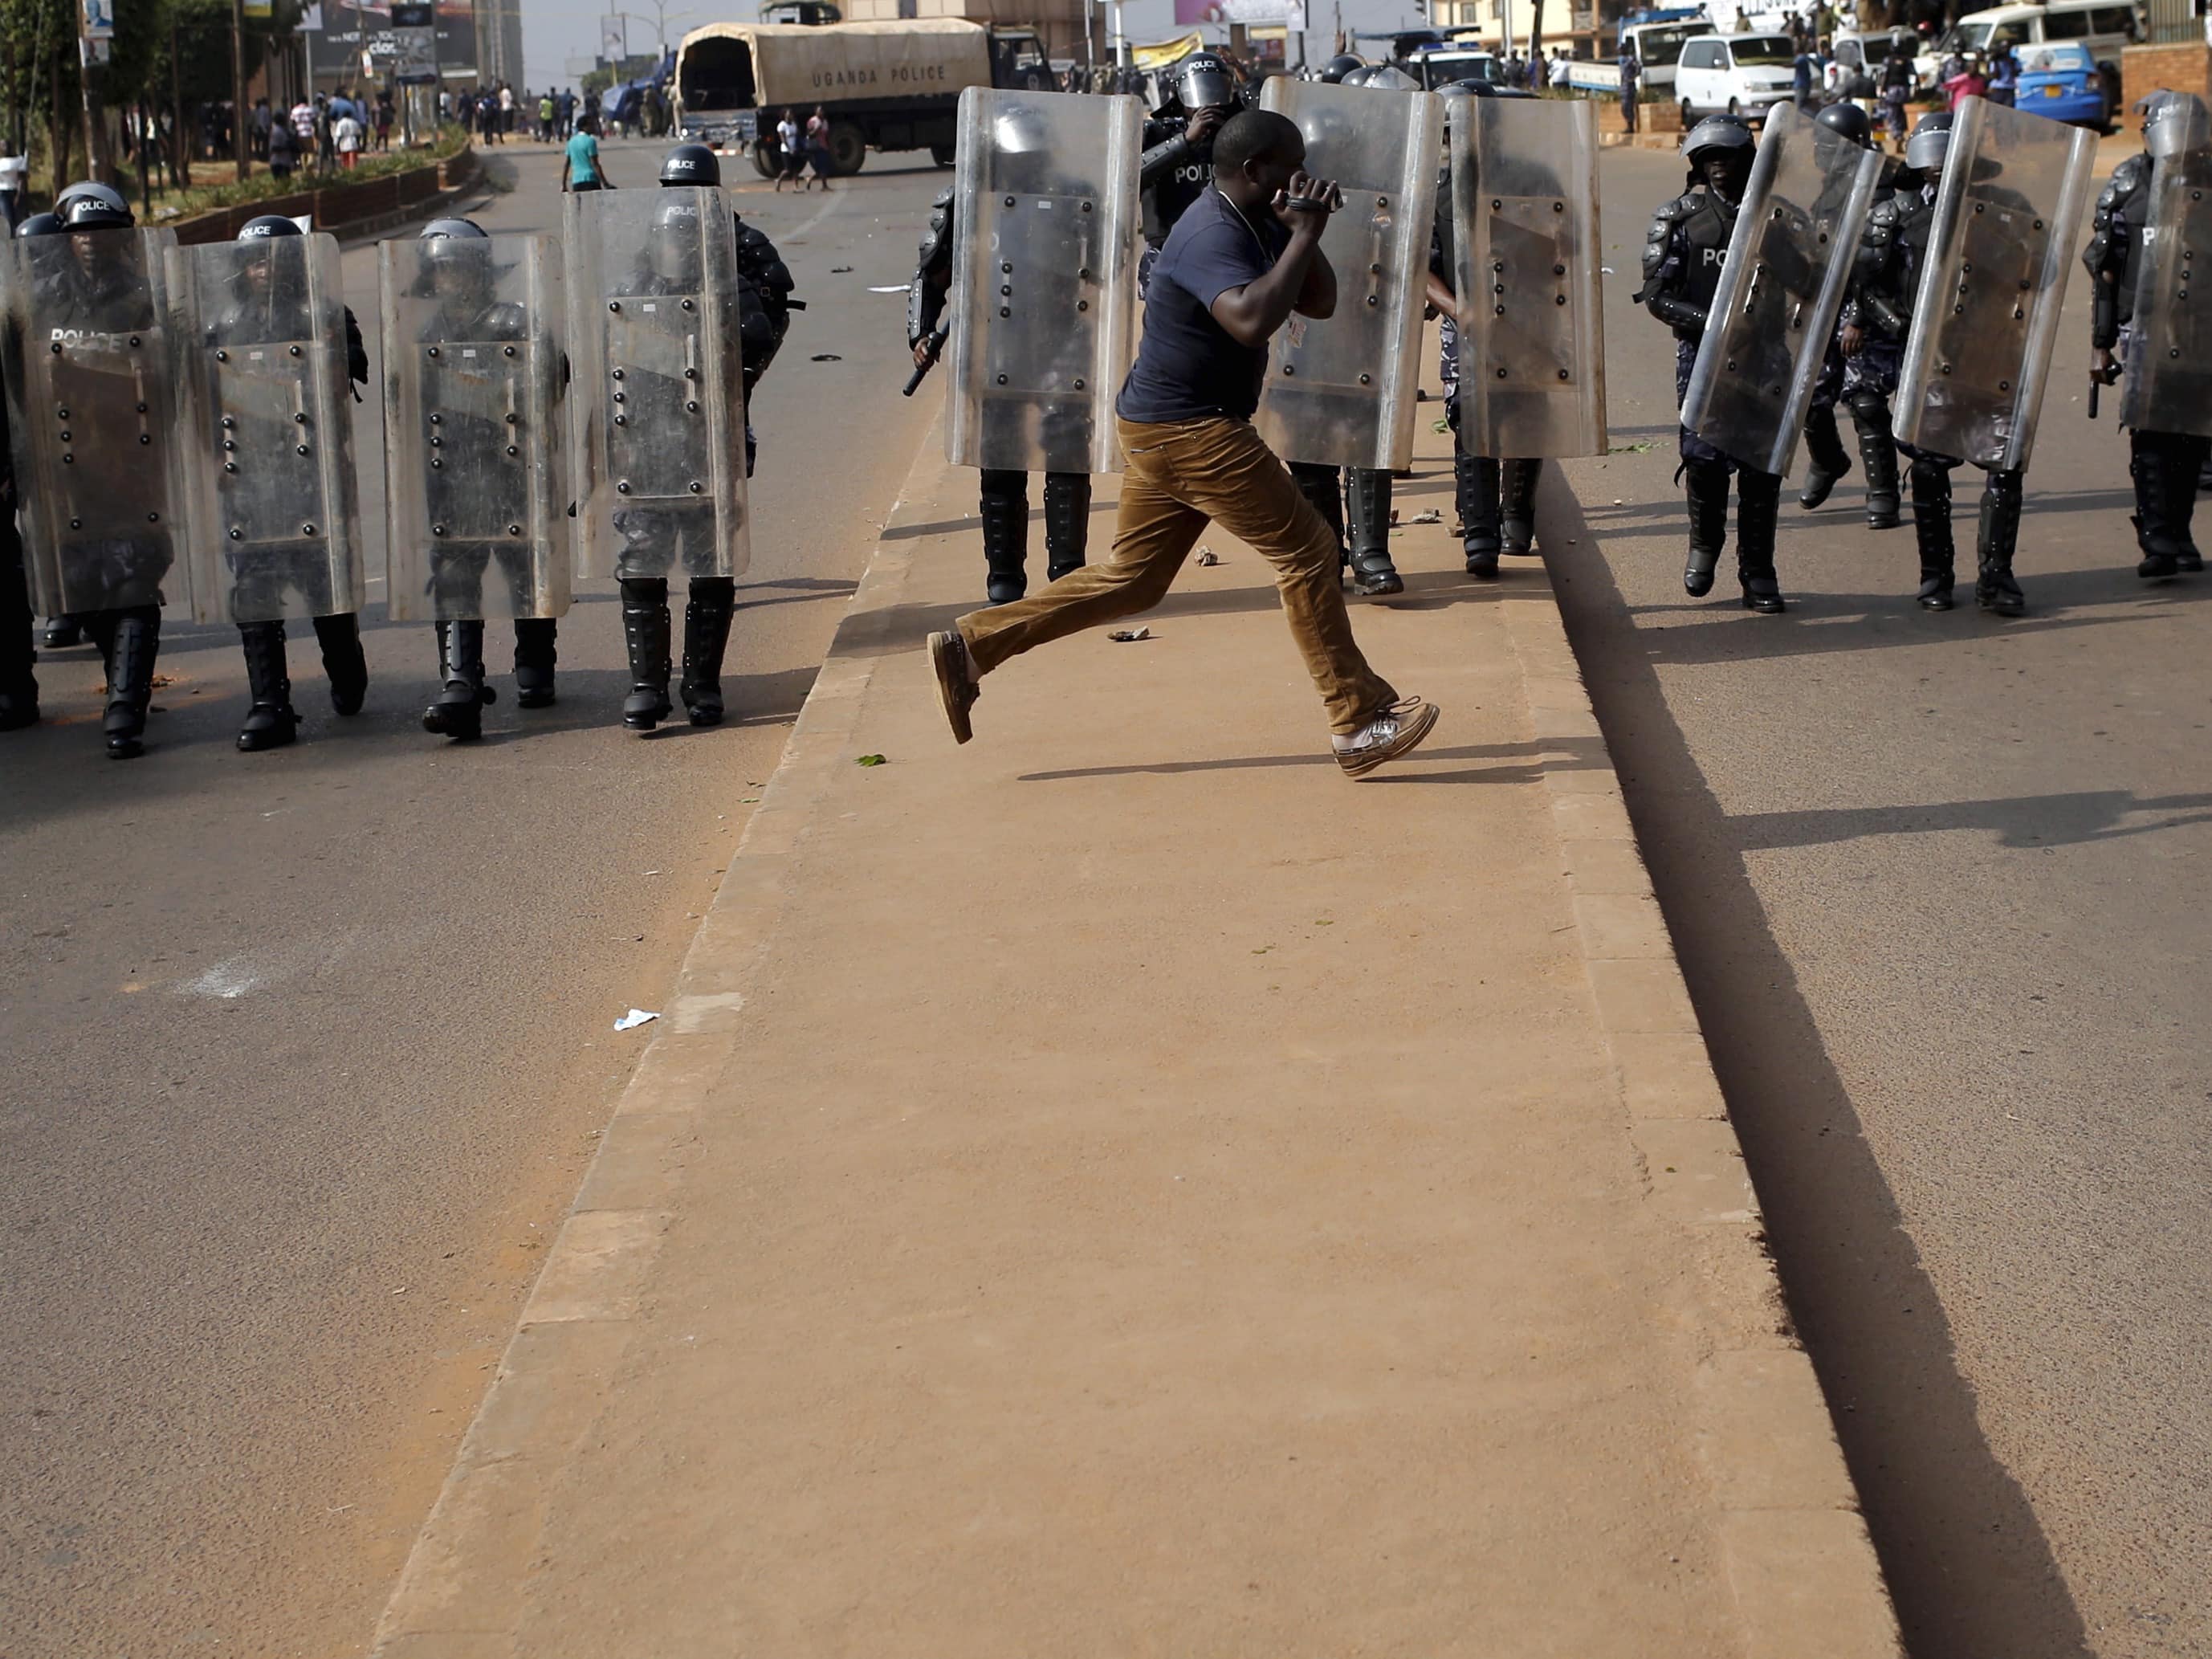 A journalist runs in front of riot police in Kampala, Uganda, 15 February 2016, REUTERS/Goran Tomasevic